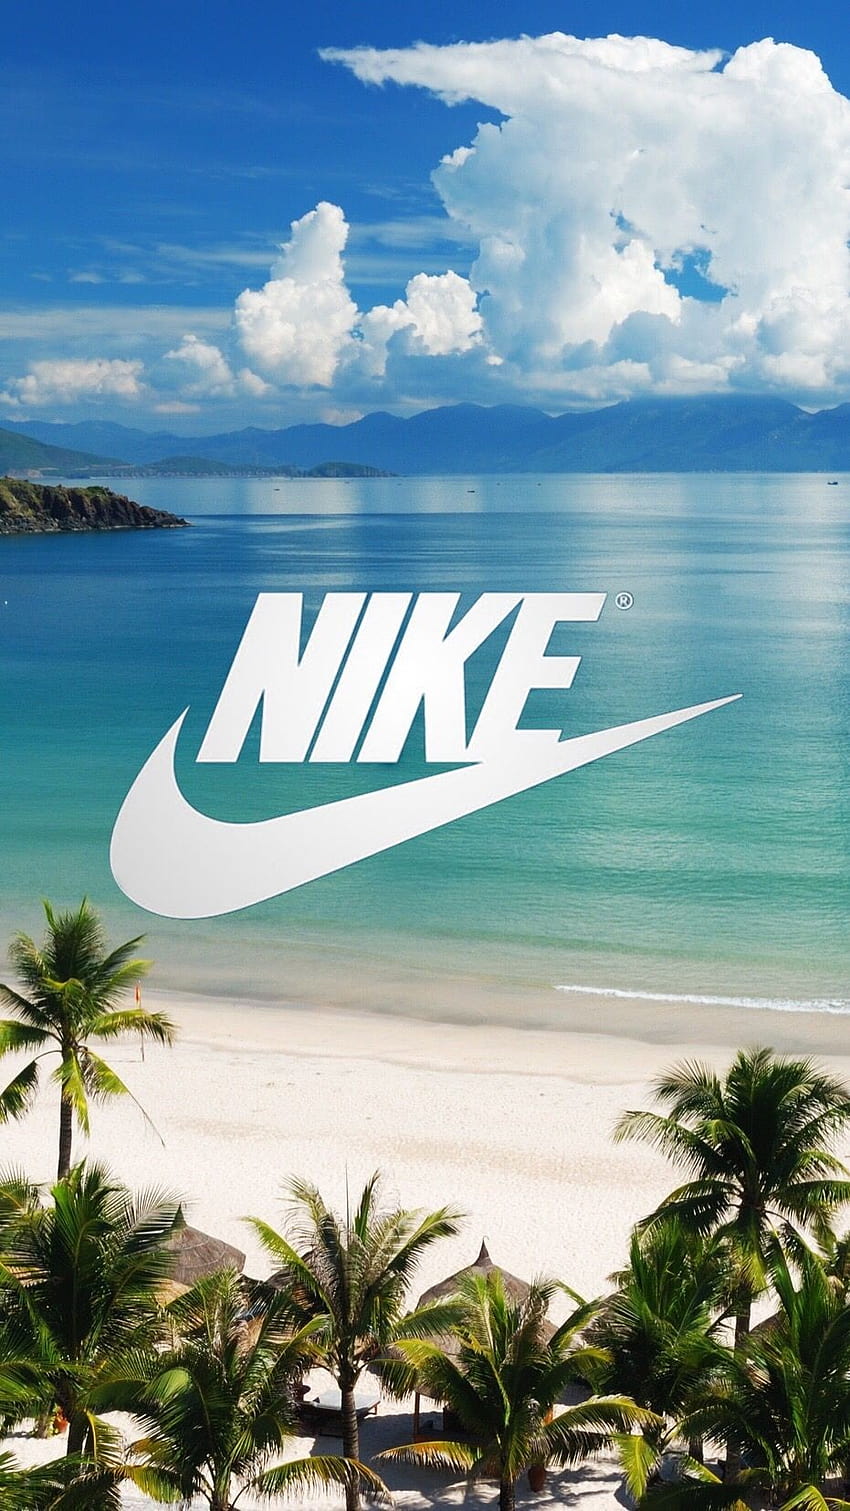 Nike wallpaper for iPhone and Android - Nike